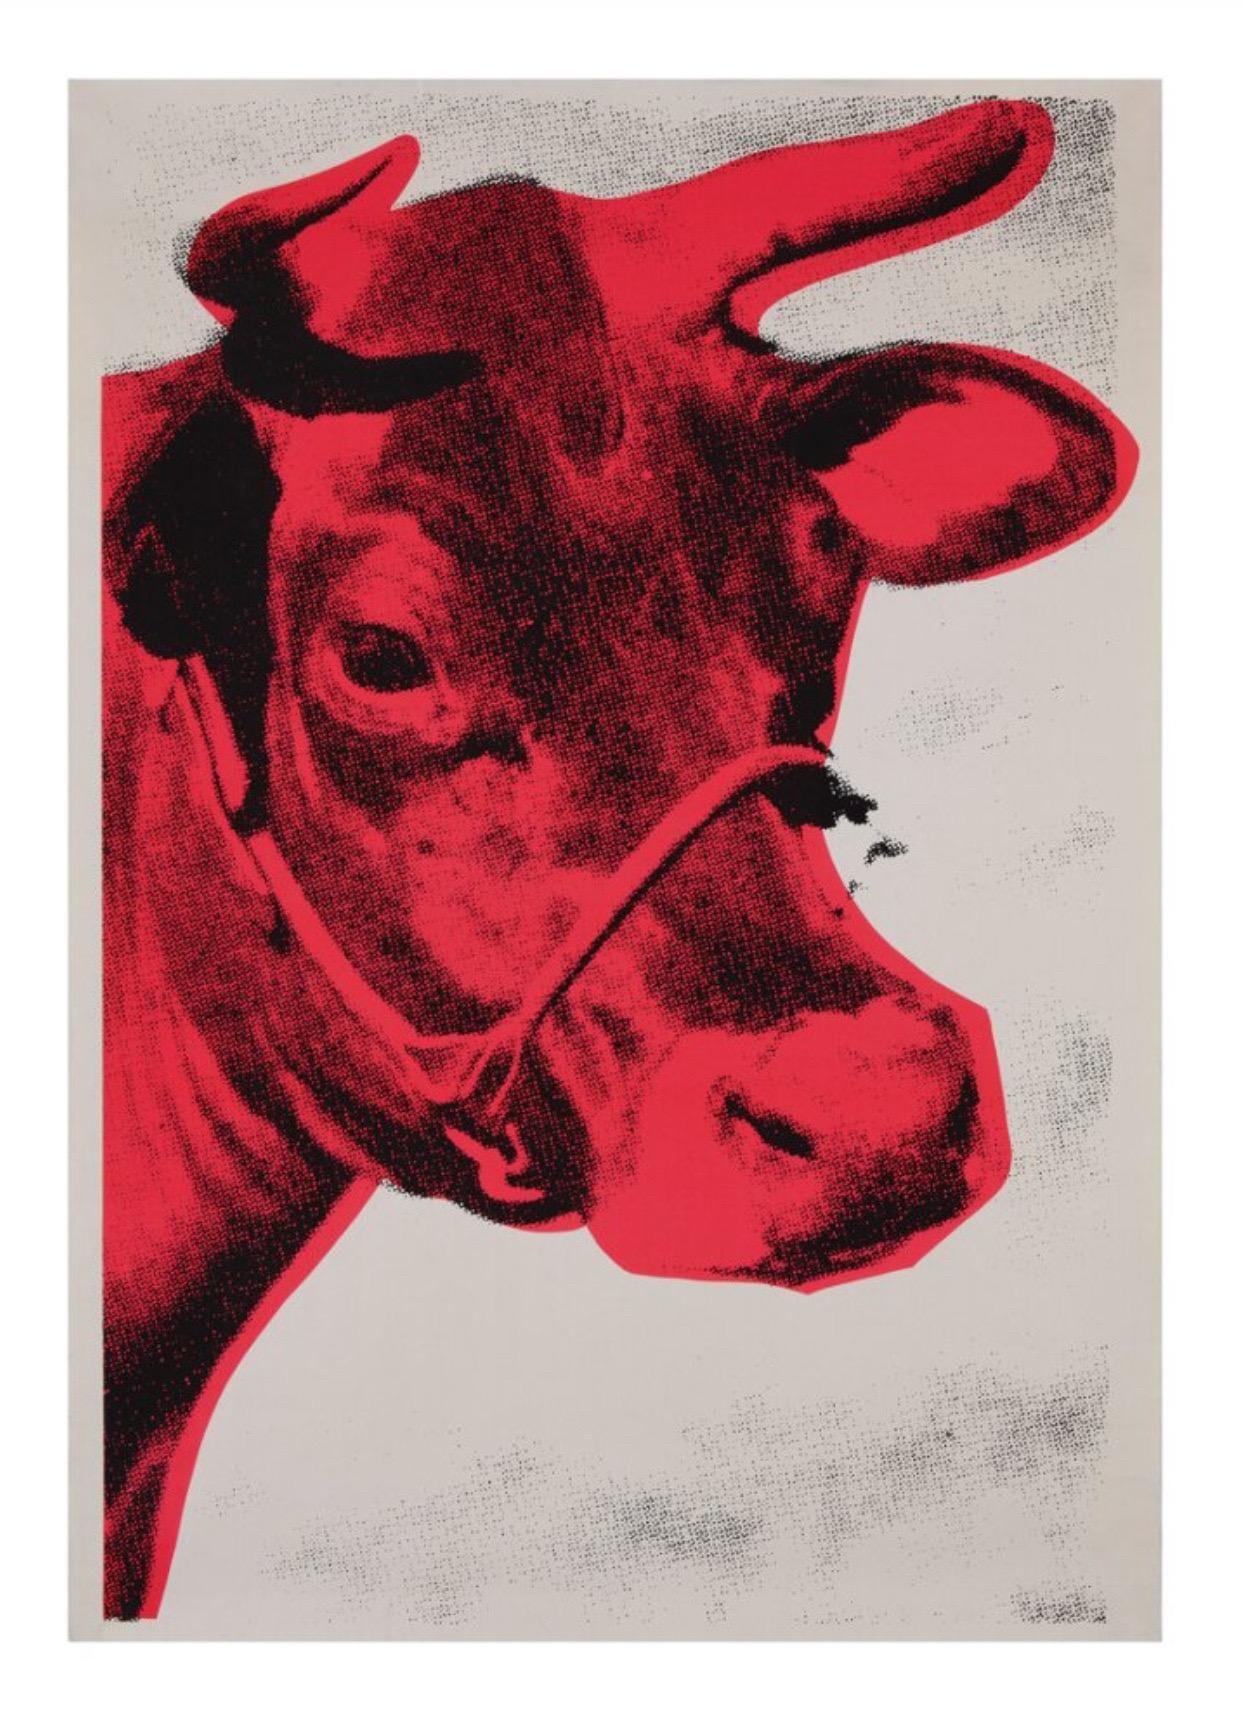 Andy Warhol, Cow, 1967 poster 

Andy’s beautiful red cow, reproduced as a large giclee print on a heavyweight watercolour paper, will look superb in any interior. 

Paper size 70 x 100 cm (27.56 x 39.37 in) 
Image size 60 x 90 cm ( 23.62 x 35.43 in) 